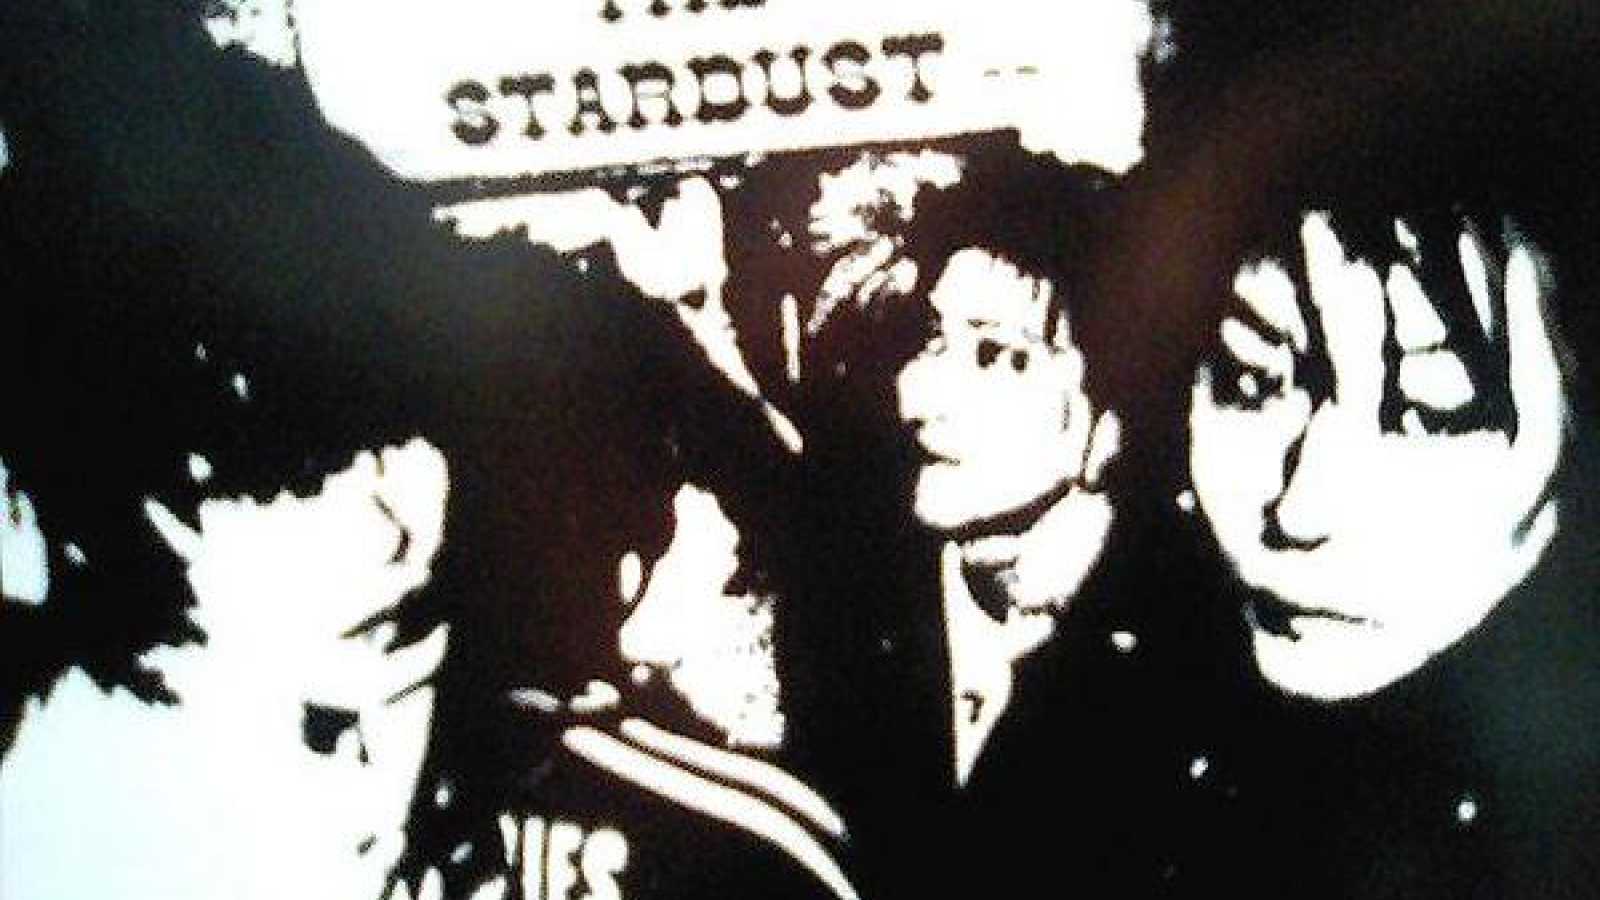 BEYOND THE STARDUST © BEYOND THE STARDUST. All rights reserved.